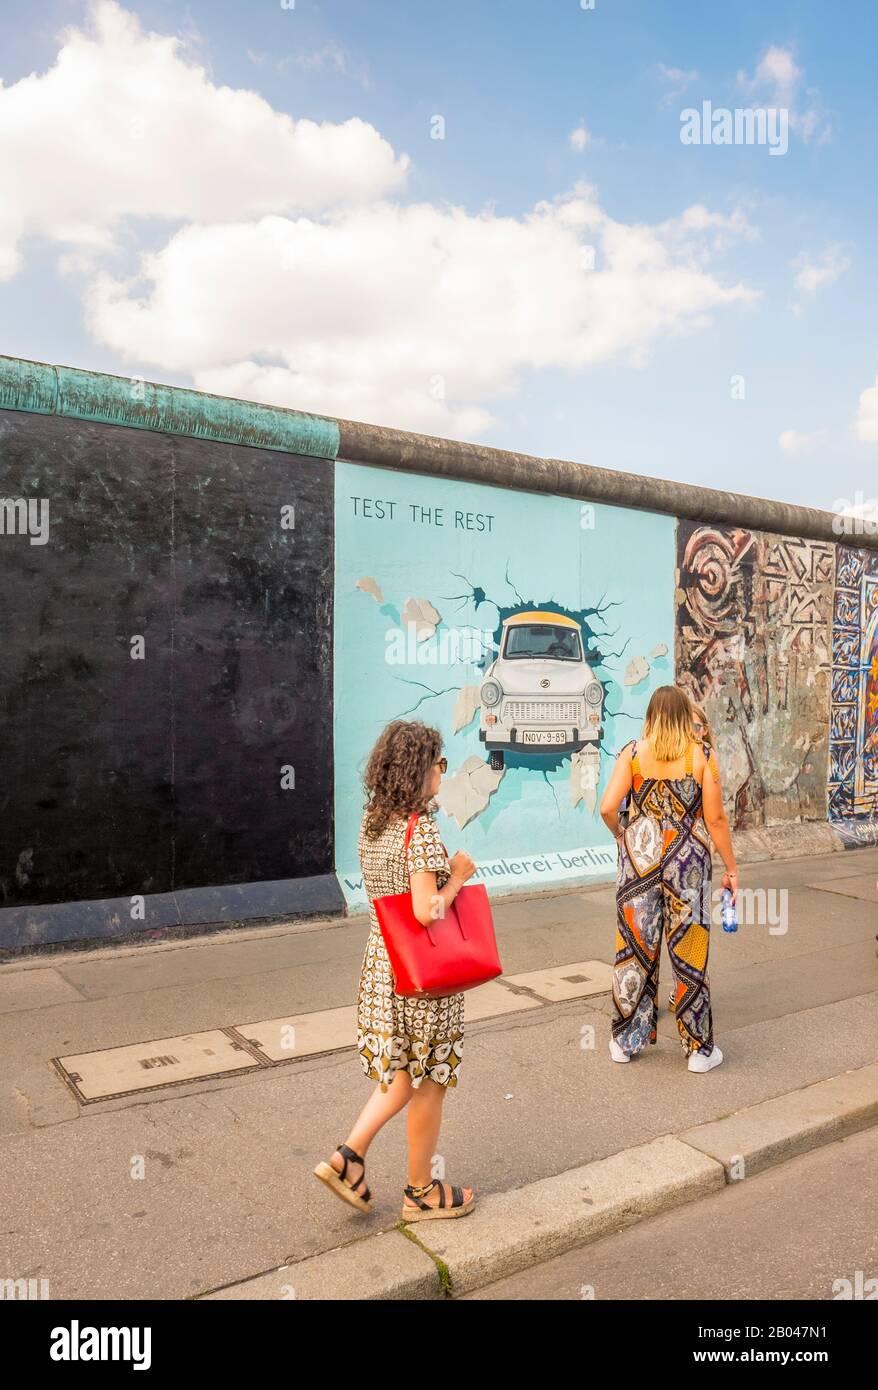 visitors at east side gallery, trabi breaking through wall Stock Photo